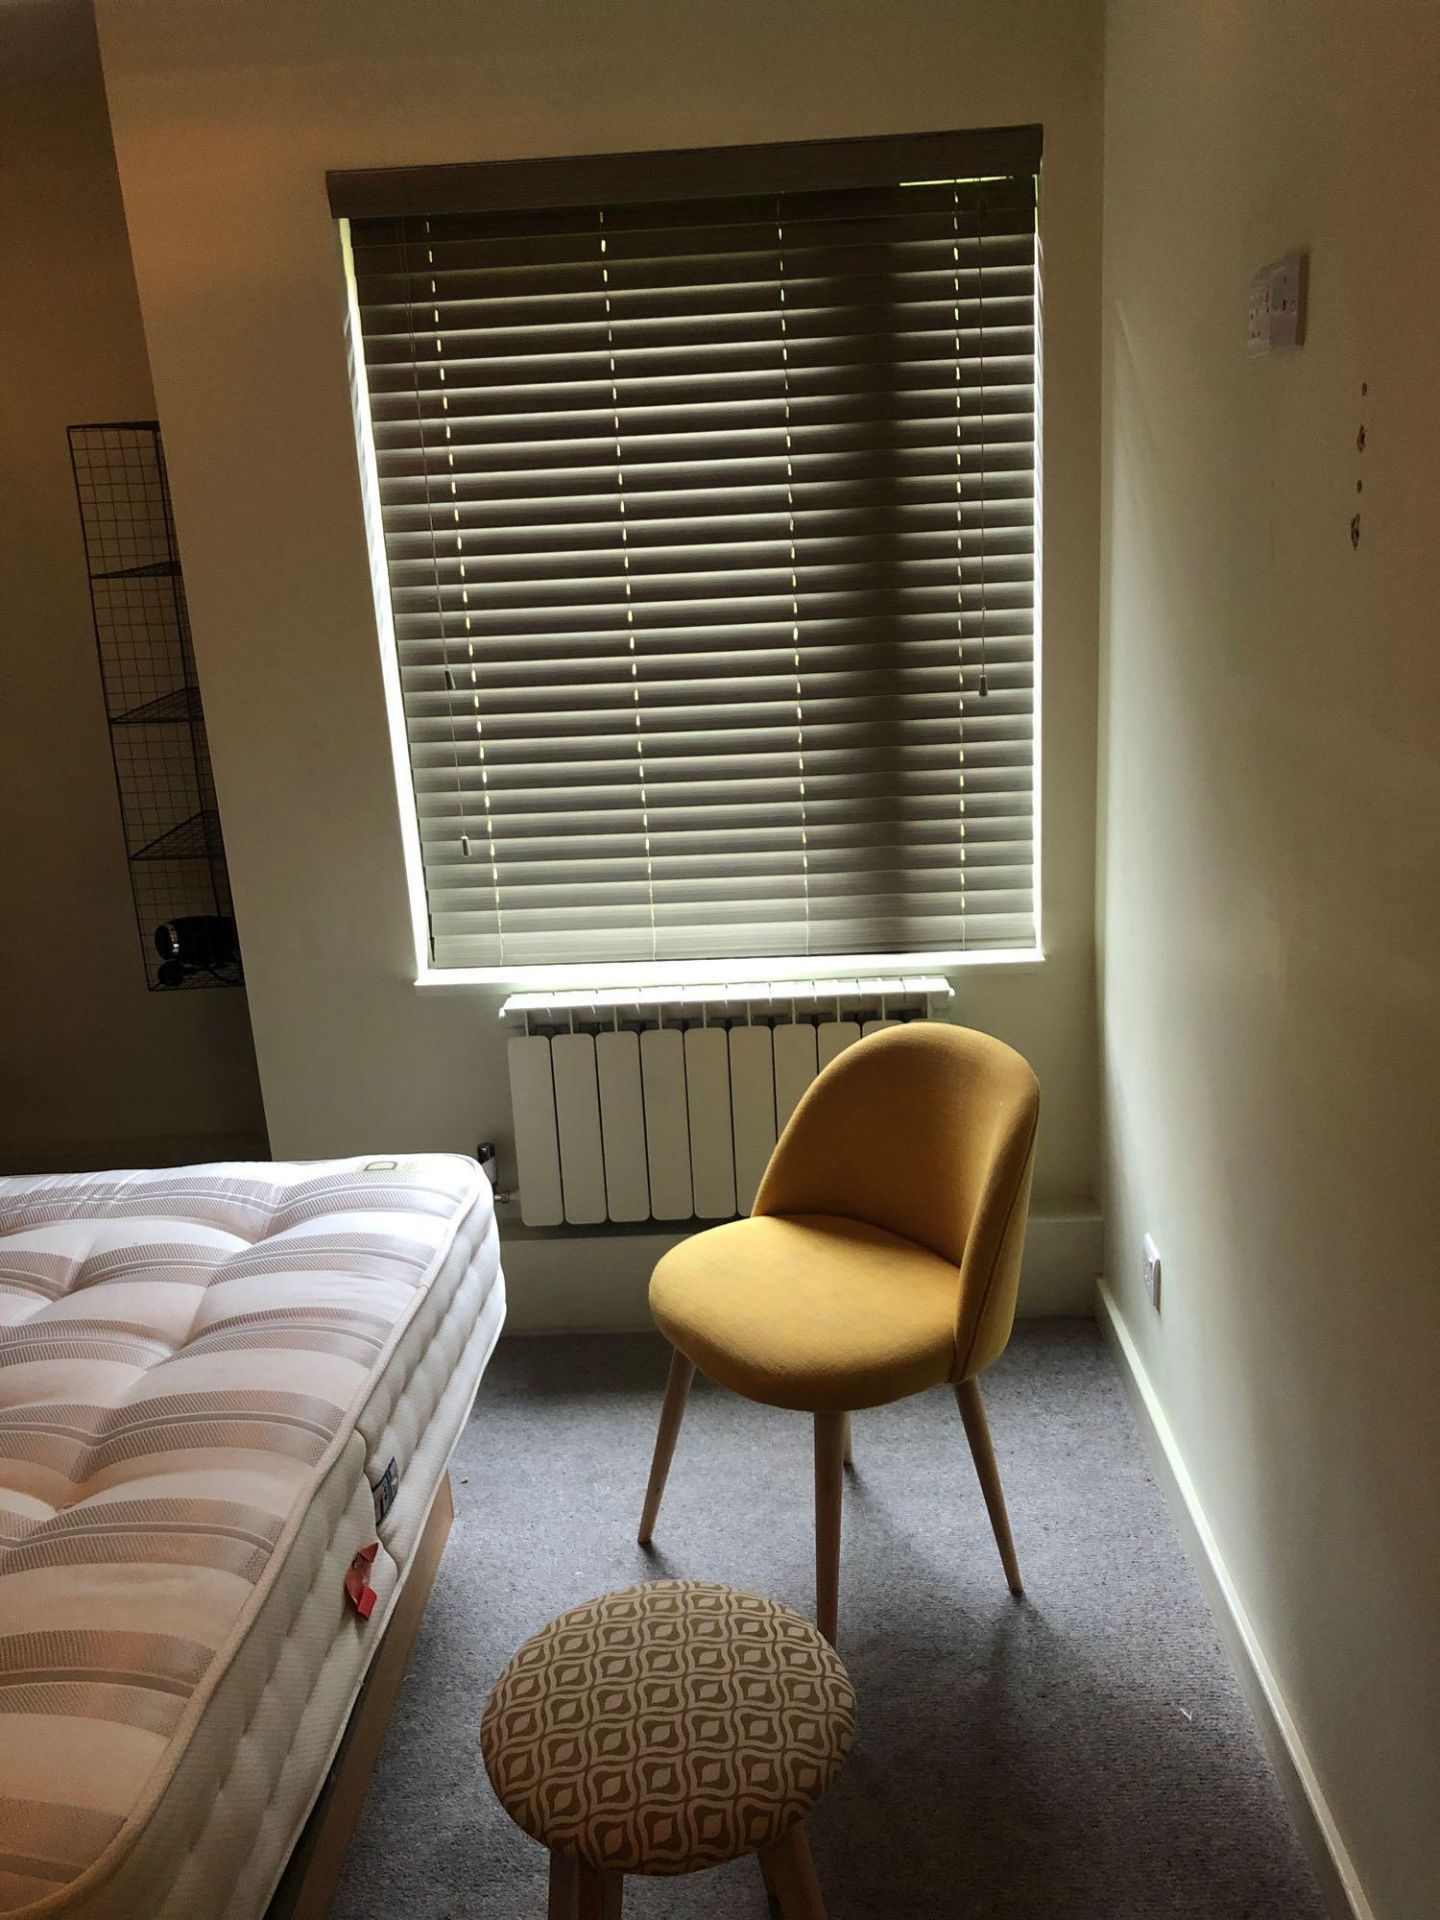 4 x Double Beds 4x Headboards 4x Chair 4x Hairdryer 4x Blinds 2x Stool Quantity Of Wire Shelves 4x - Image 13 of 15